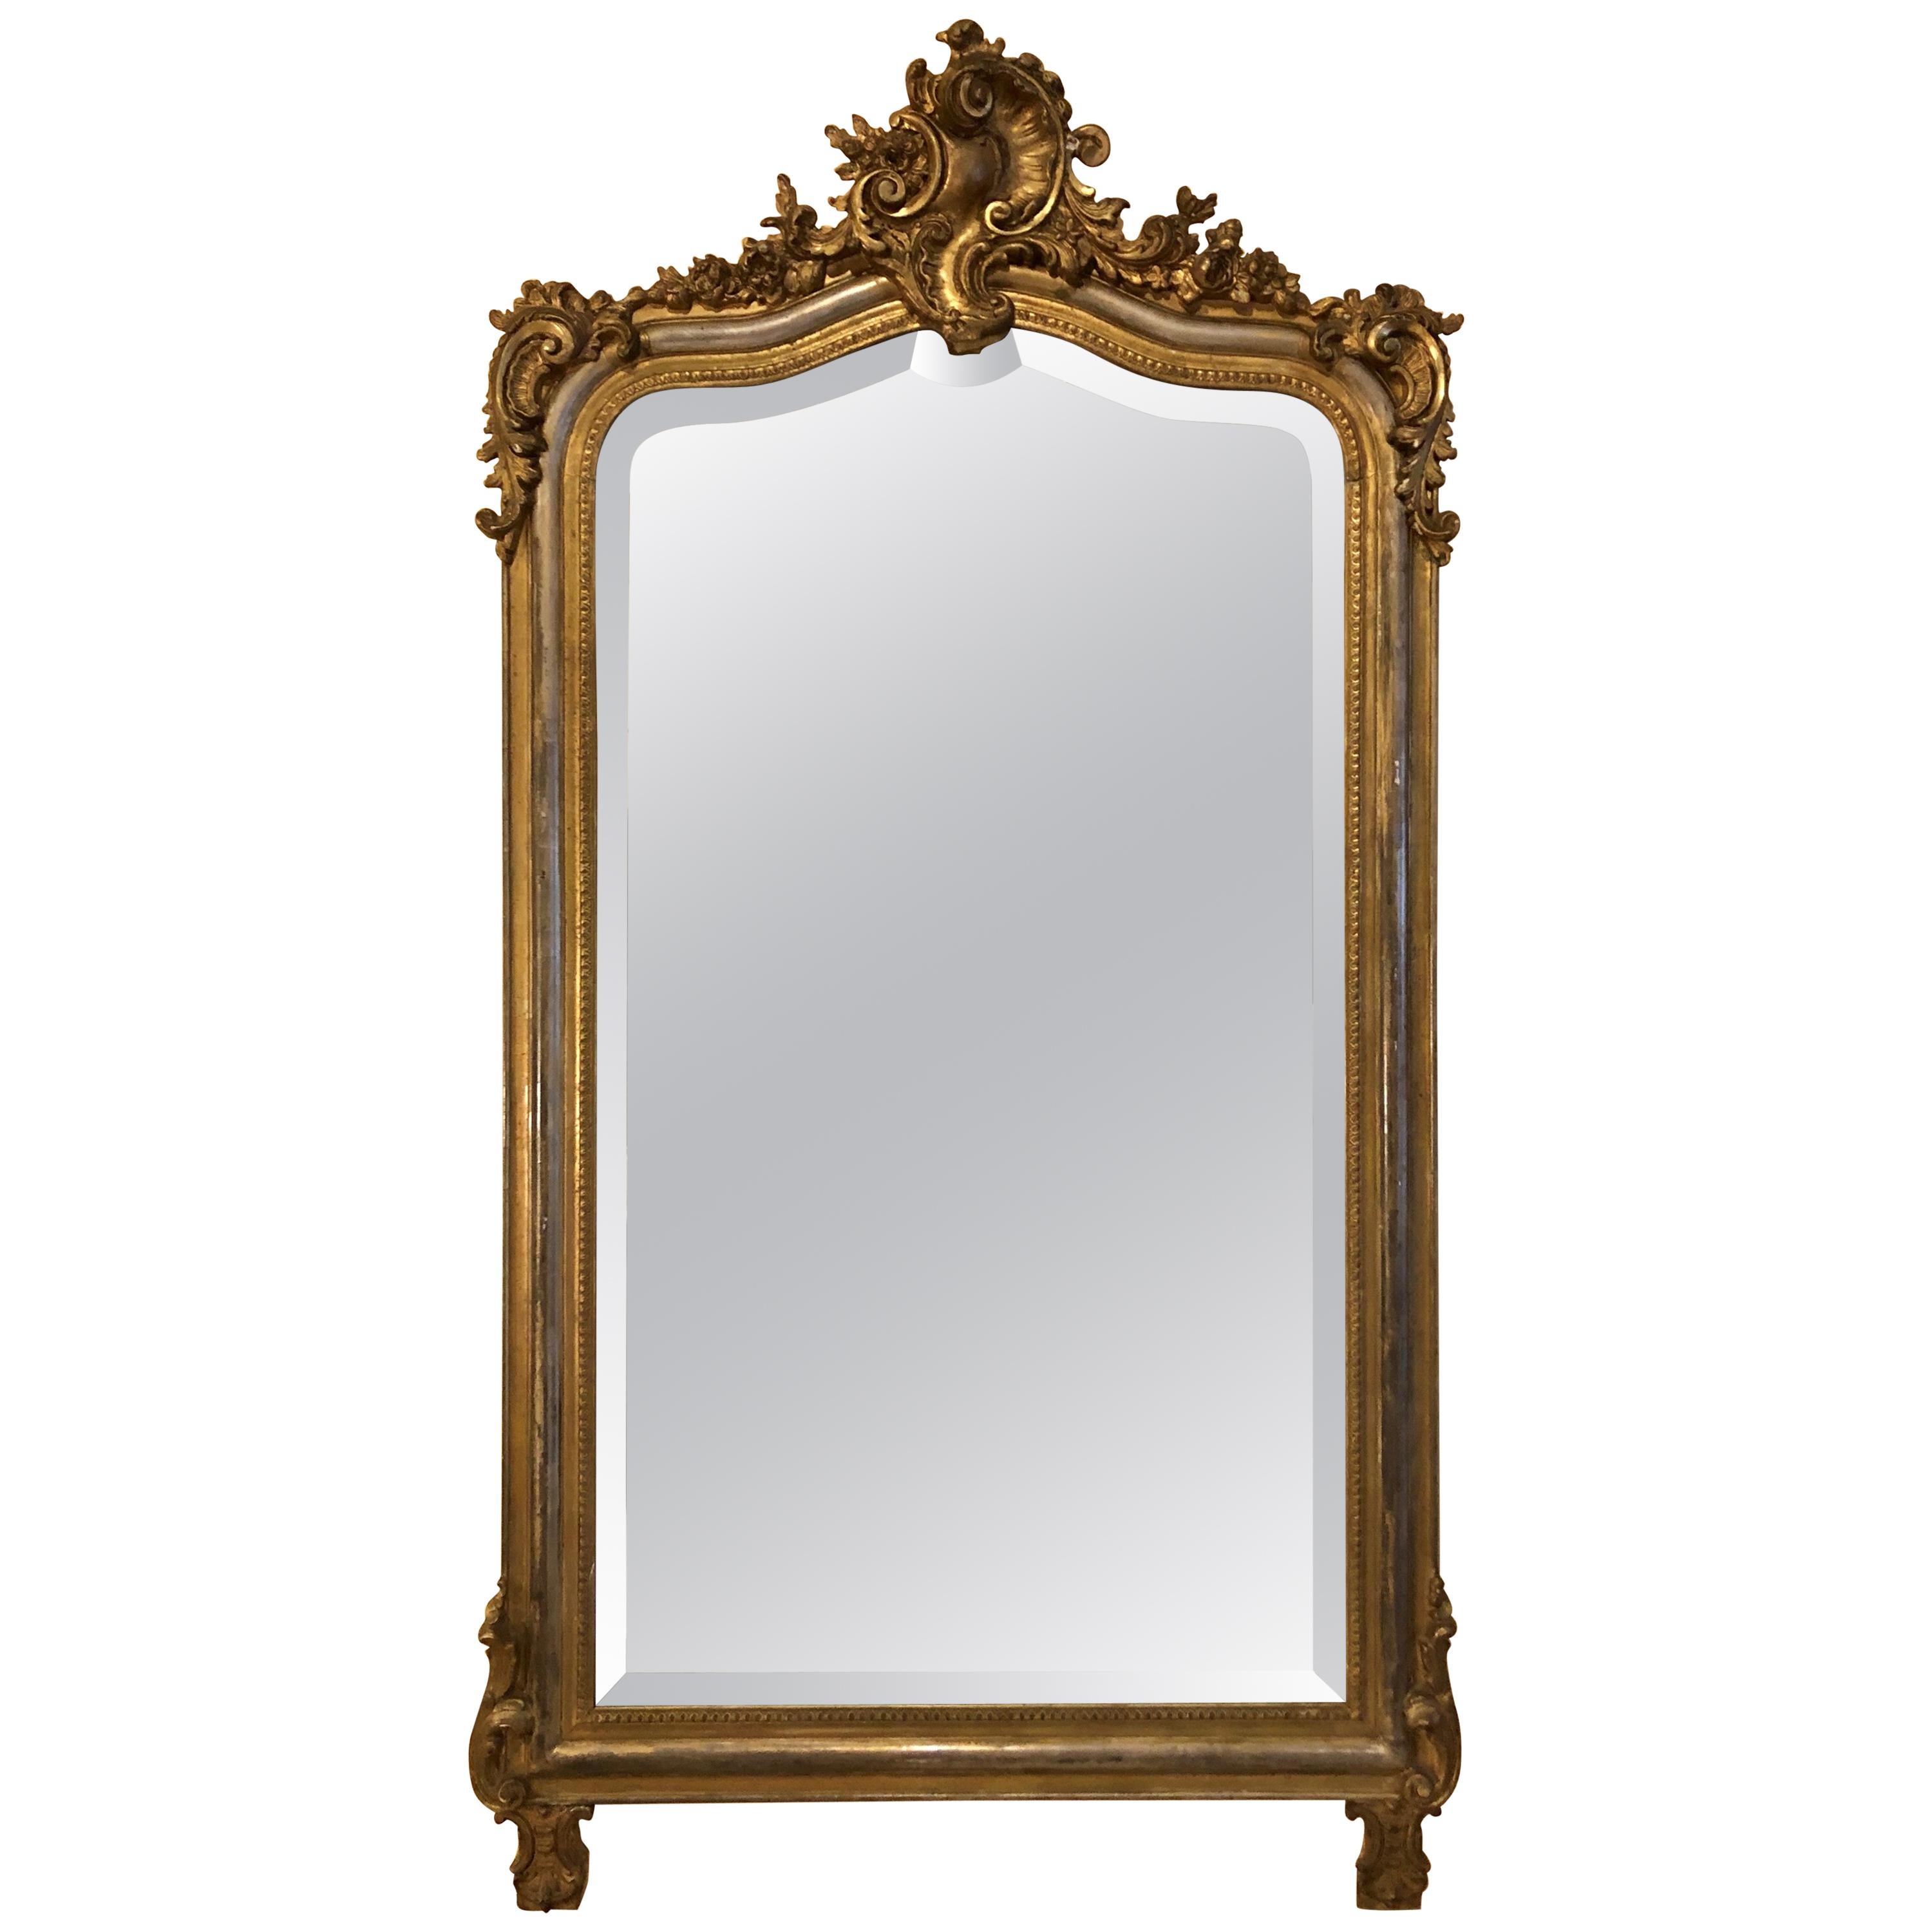 Antique French Two-Tone Gold Leaf Mirror with Original Beveling, circa 1880